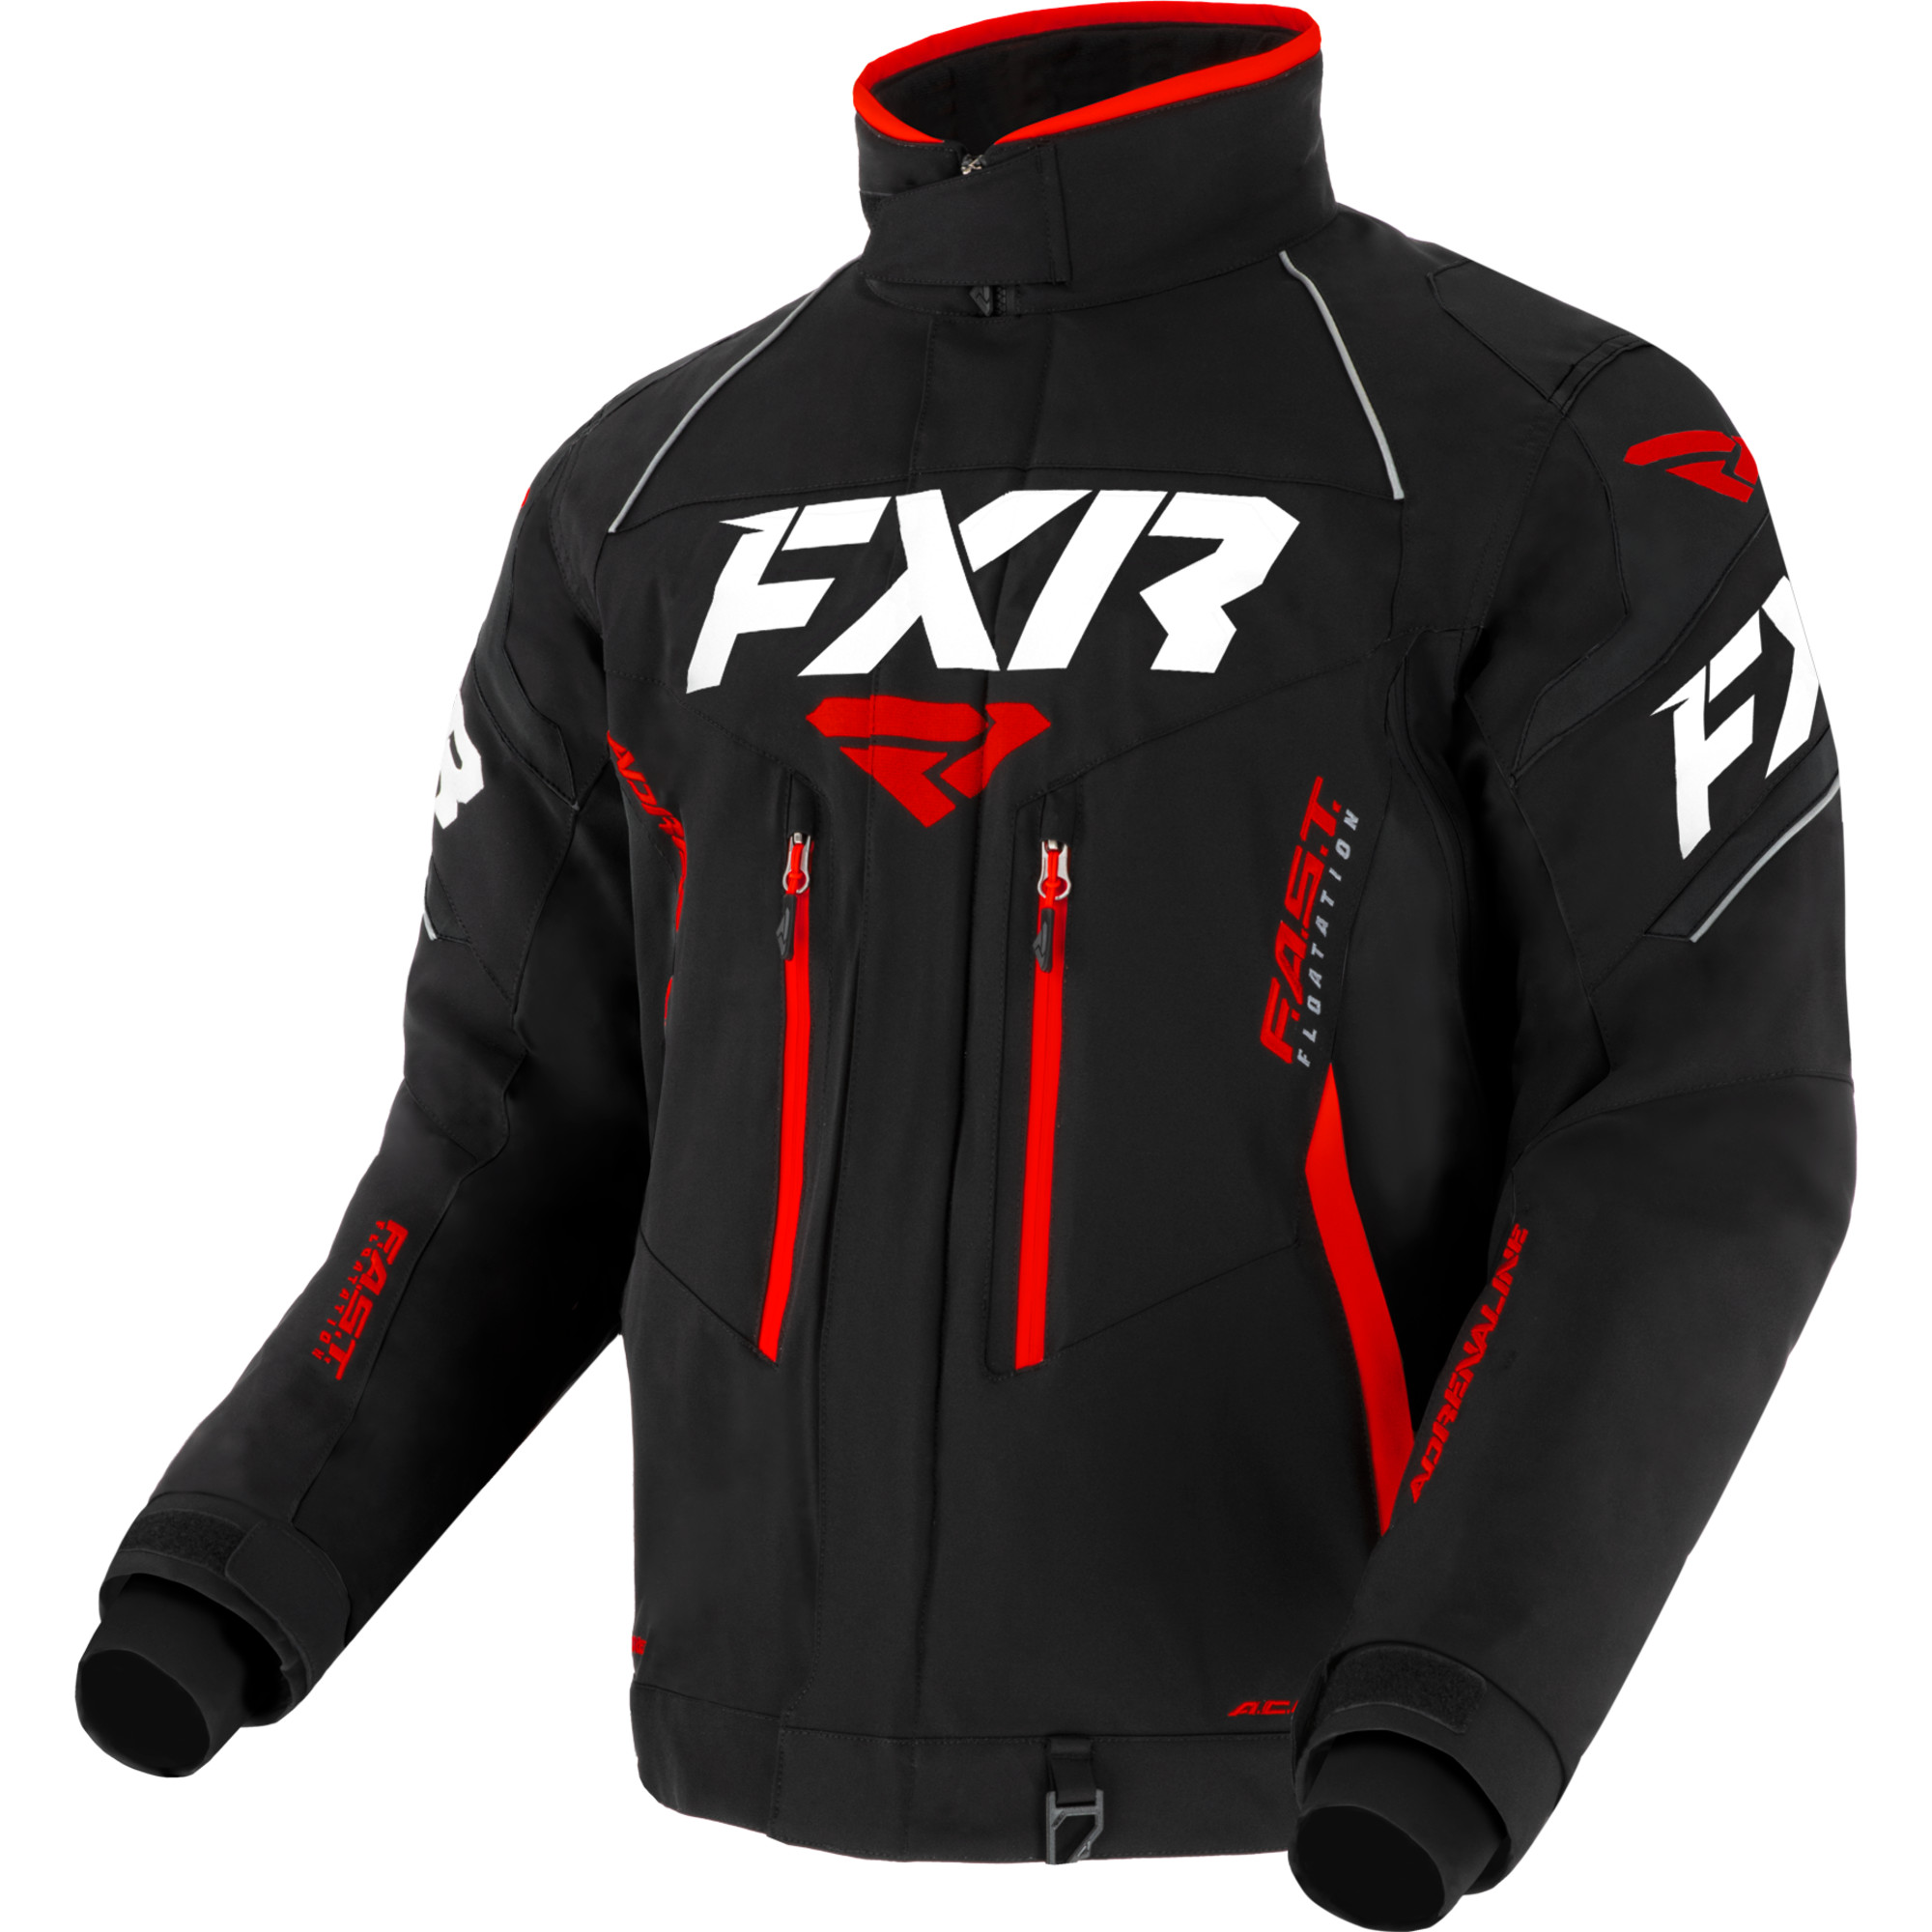 fxr racing insulated jackets for men adrenaline fast